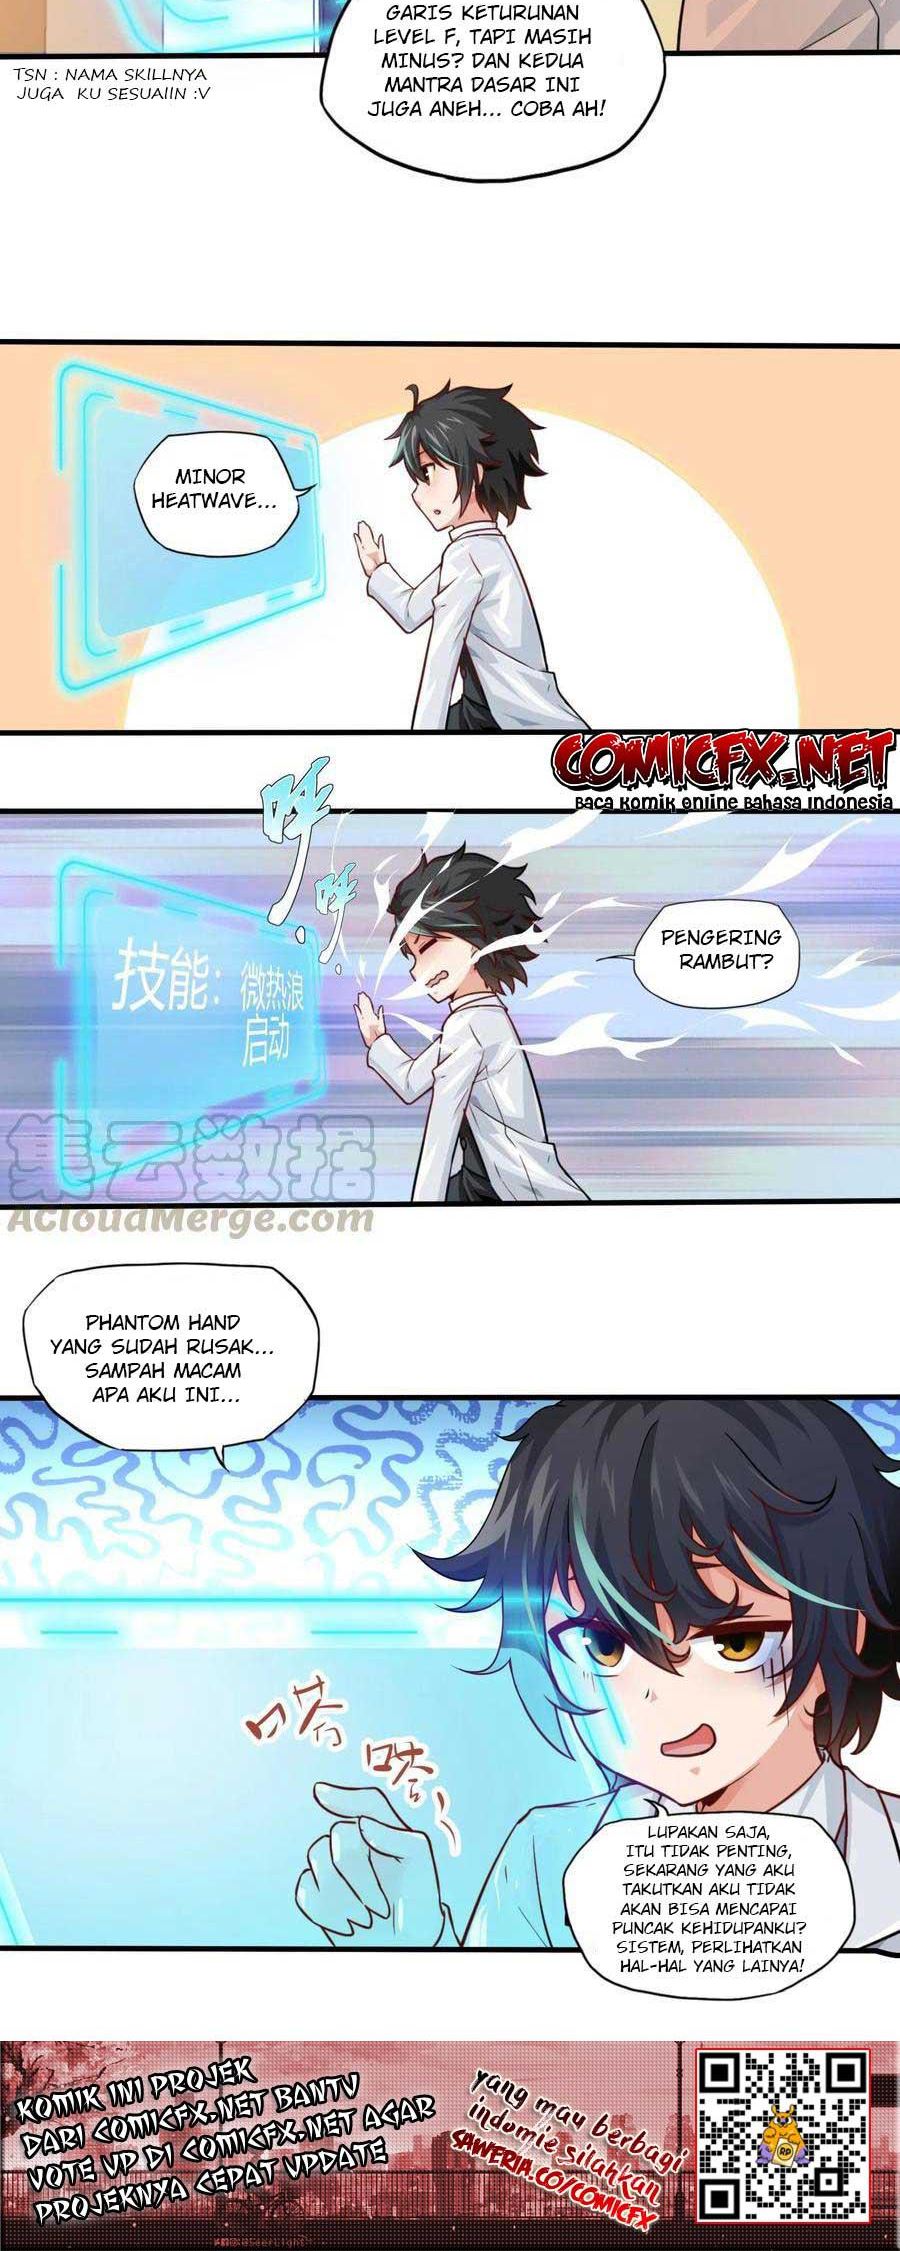 Dilarang COPAS - situs resmi www.mangacanblog.com - Komik little tyrant doesnt want to meet with a bad end 001 - chapter 1 2 Indonesia little tyrant doesnt want to meet with a bad end 001 - chapter 1 Terbaru 12|Baca Manga Komik Indonesia|Mangacan